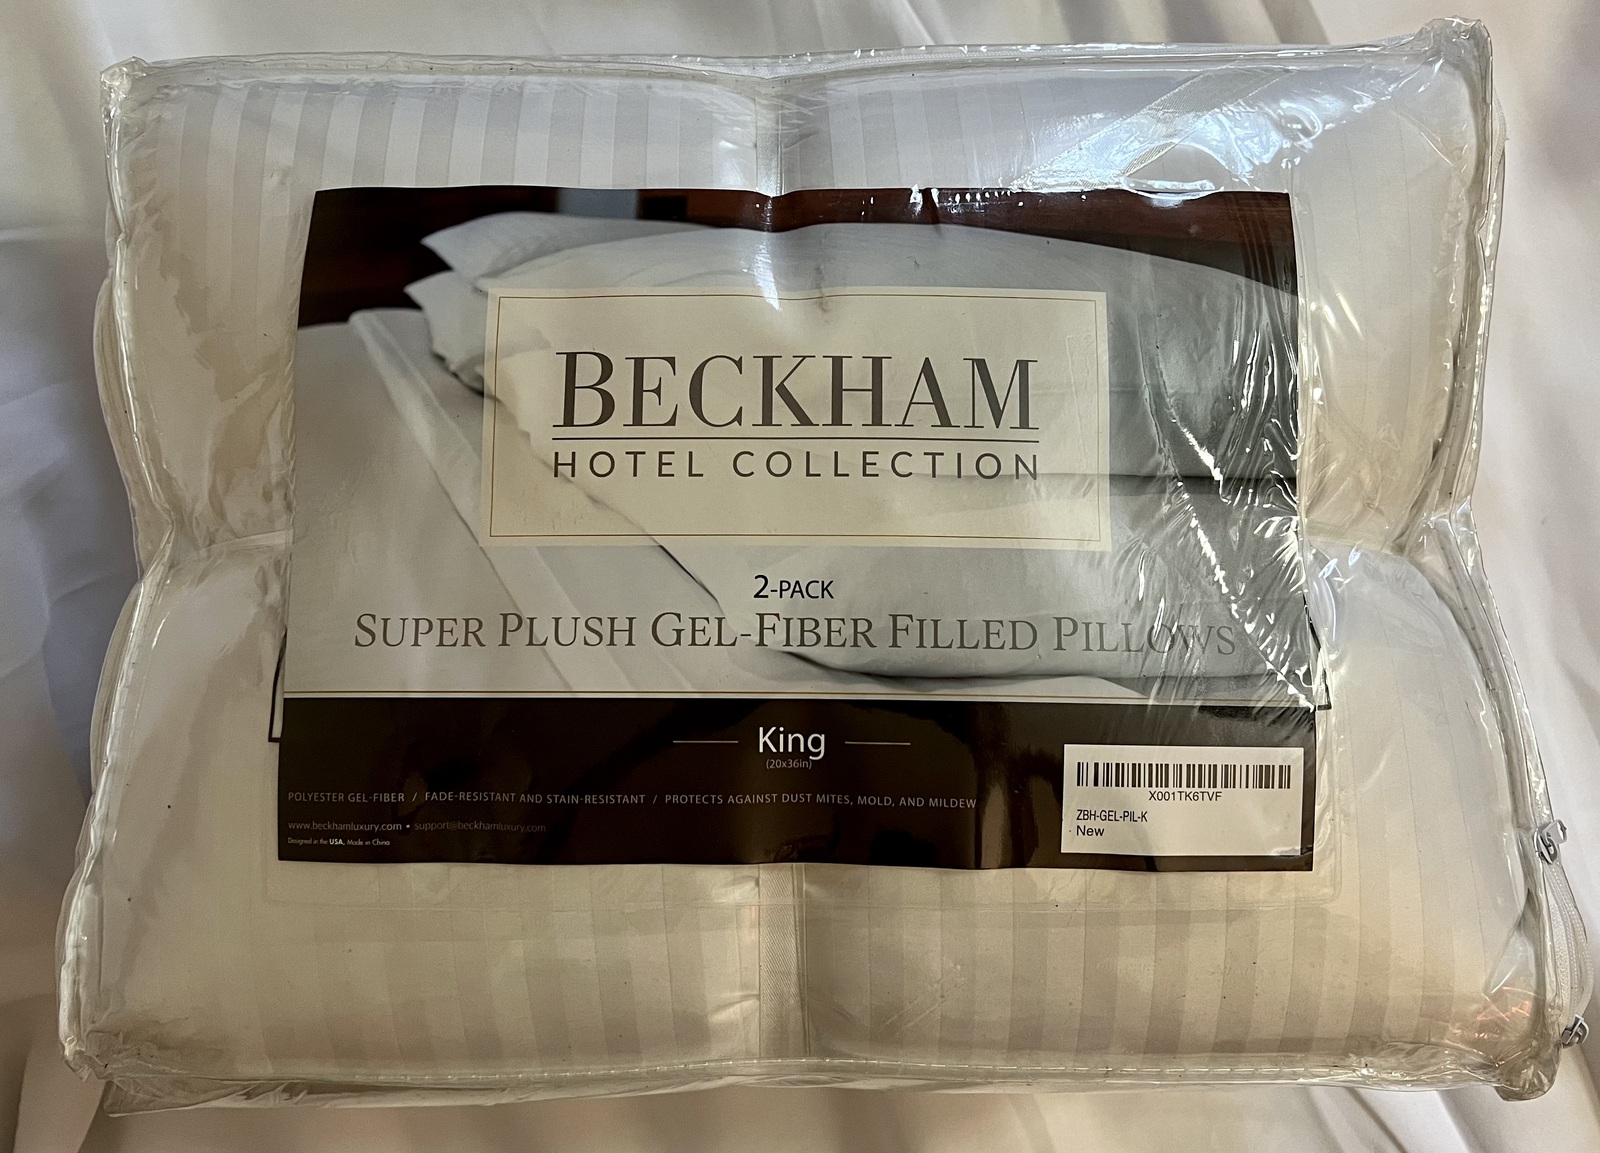  Beckham Hotel Collection Bed Pillows King Size Set of